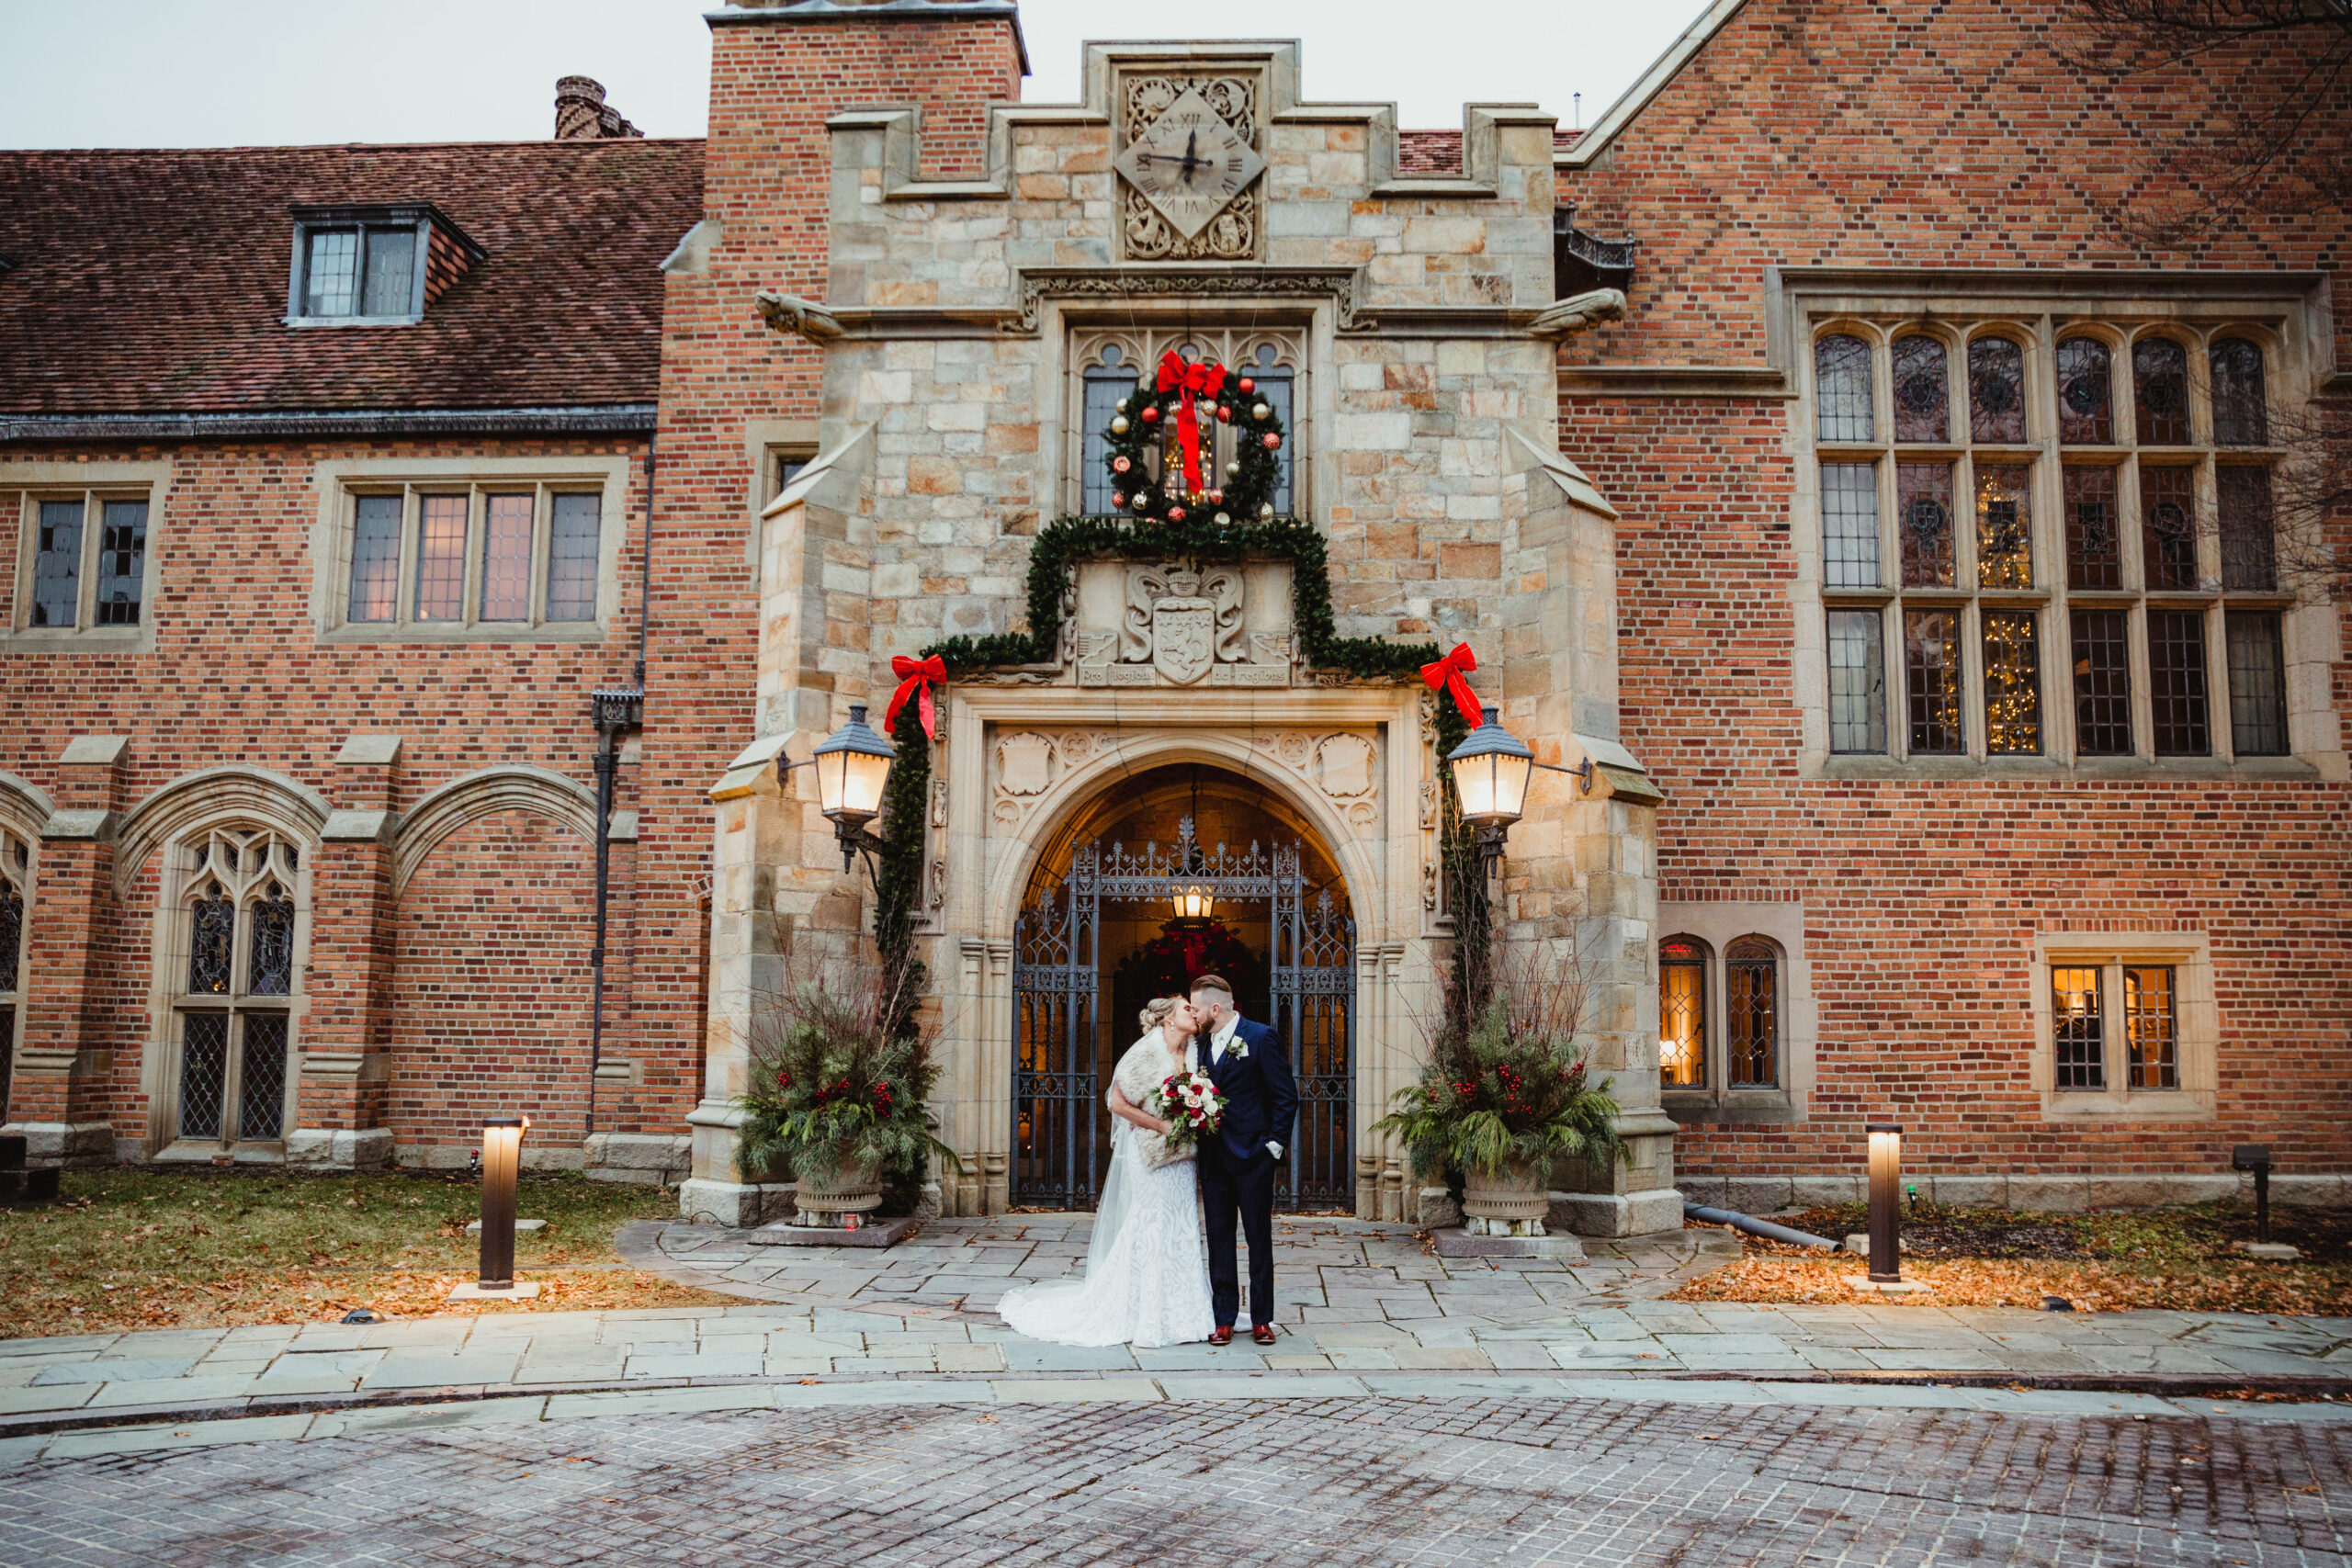 Kim + Jeff stand outside Meadowbrook Hall at Oakland University in Michigan where they just got married.